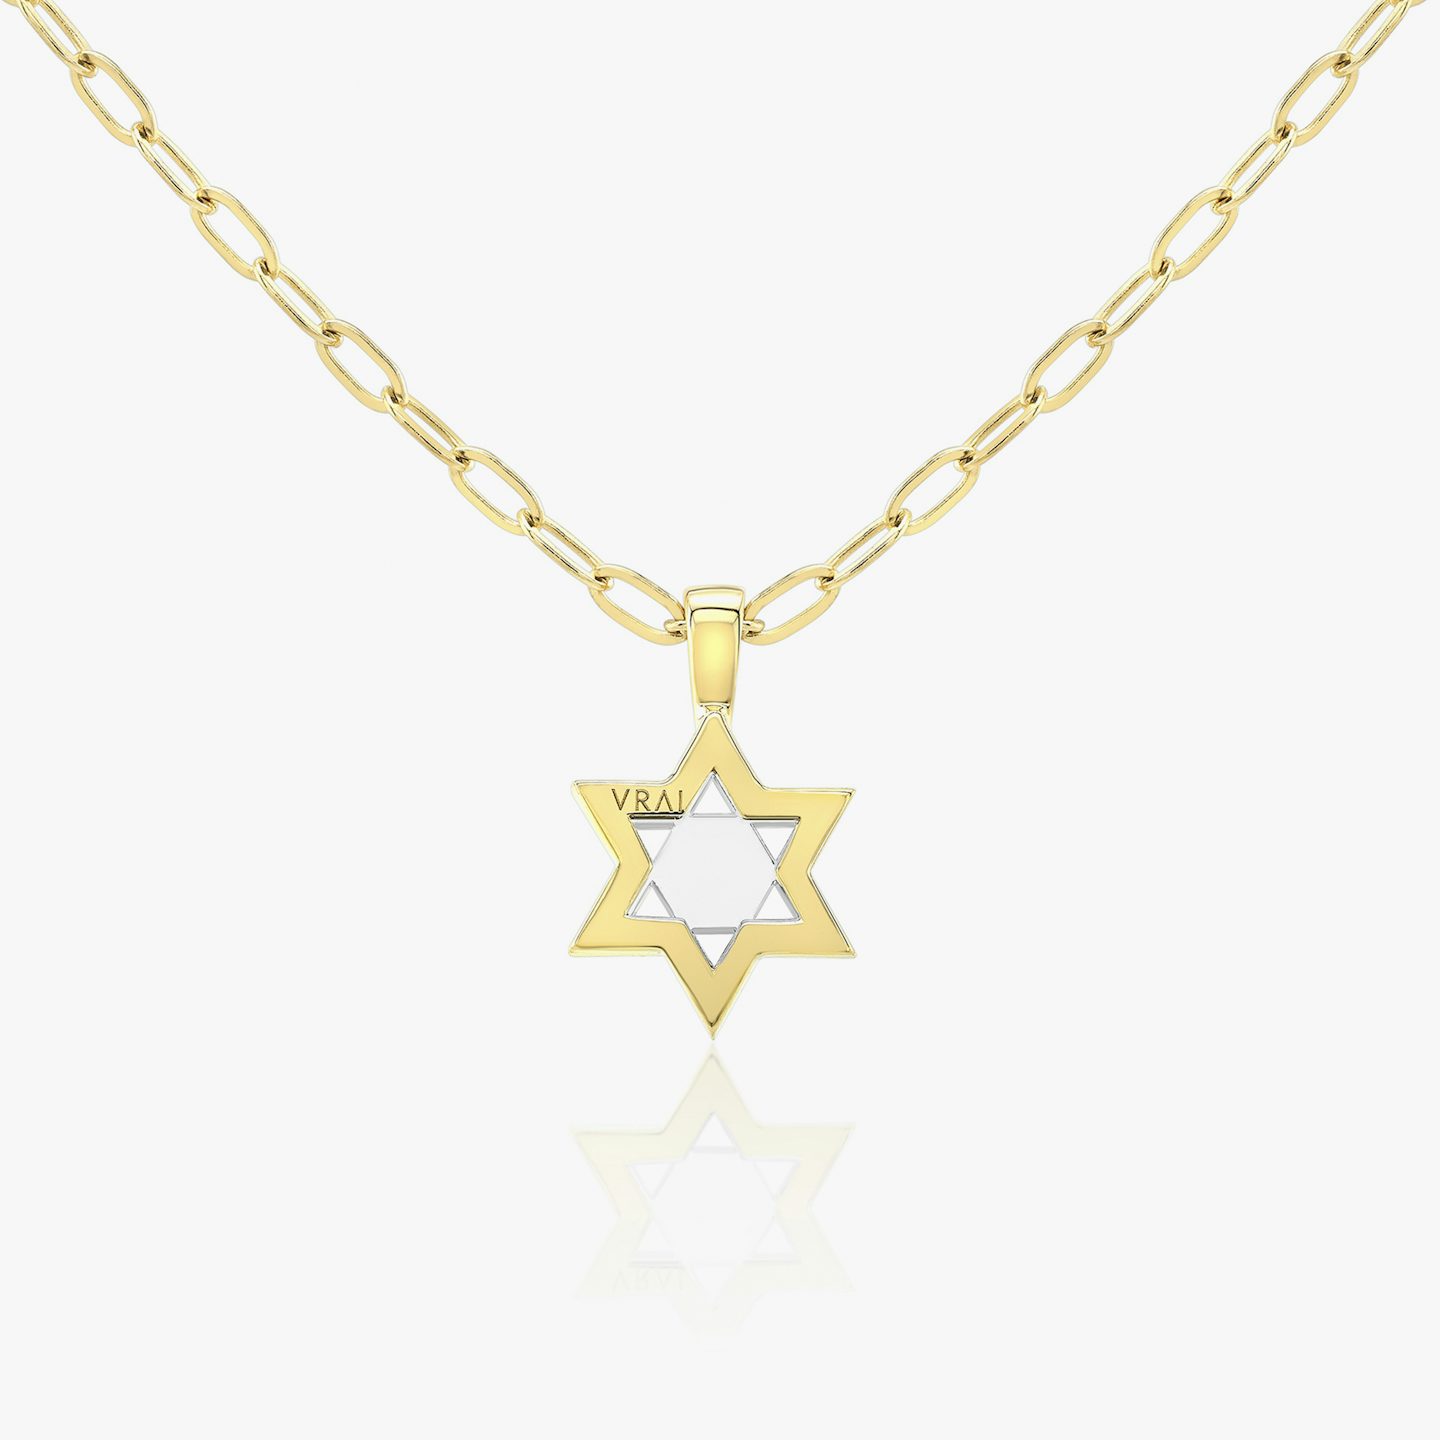 VRAI Solitaire Star | 18k | 18k Yellow Gold | Chain length: 18-20